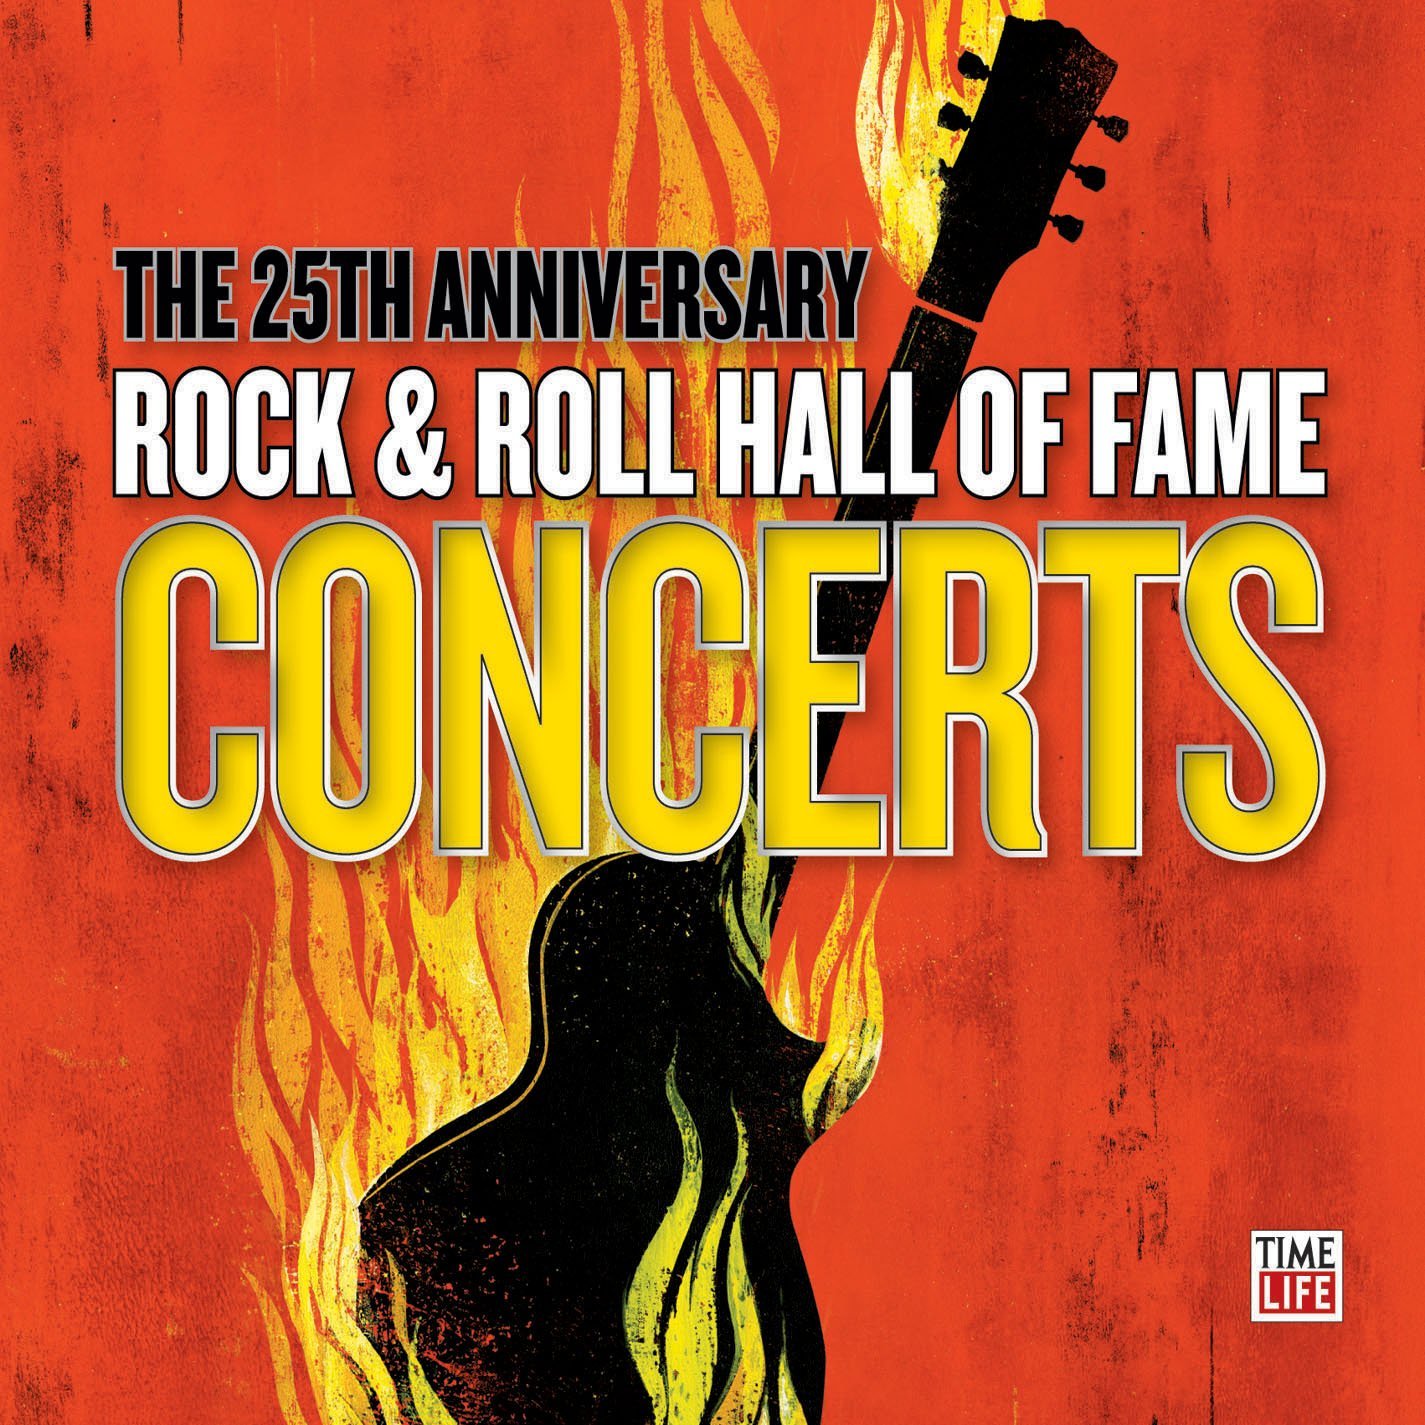 VA - The 25th Anniversary Rock & Roll Hall Of Fame Concerts (2010) [HDTracks FLAC 24bit/48kHz]